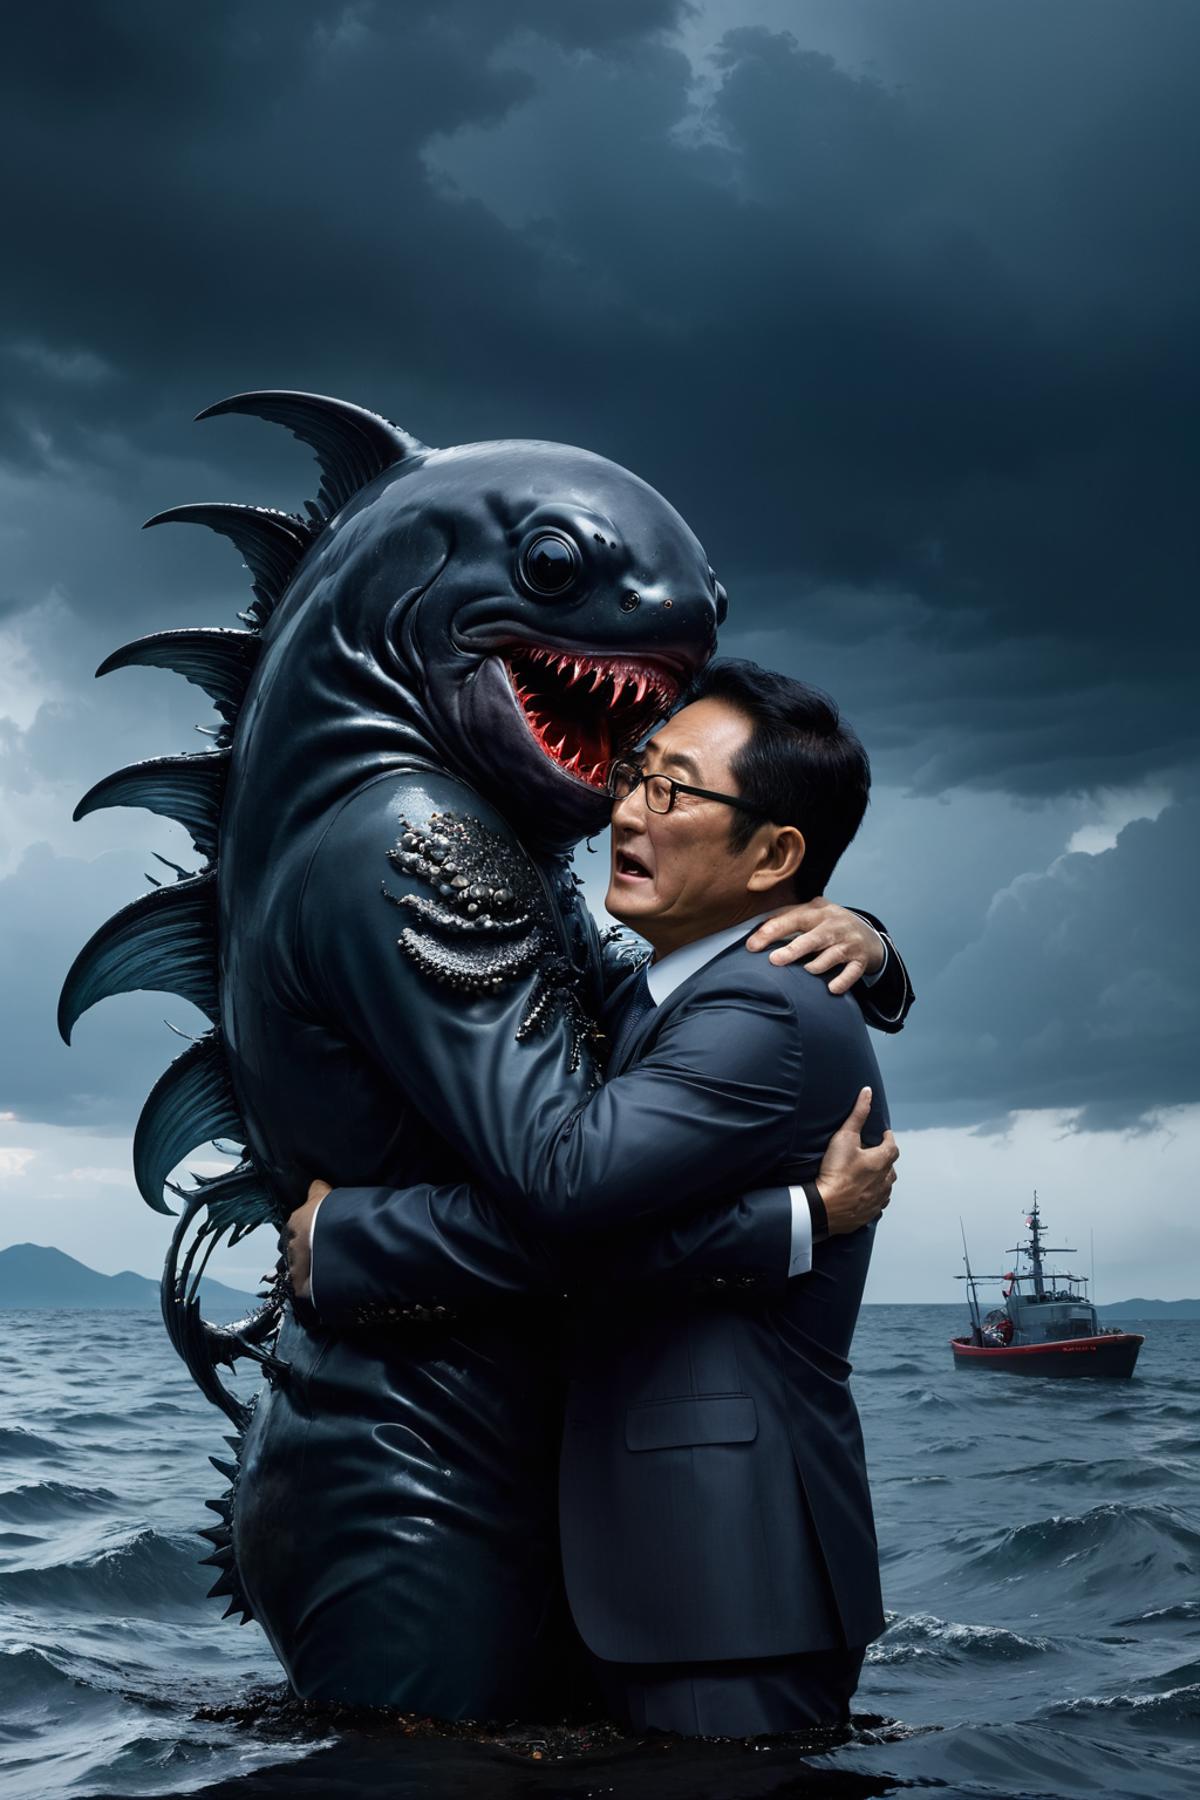 A man hugging a fish monster with sharp teeth, in front of a boat.